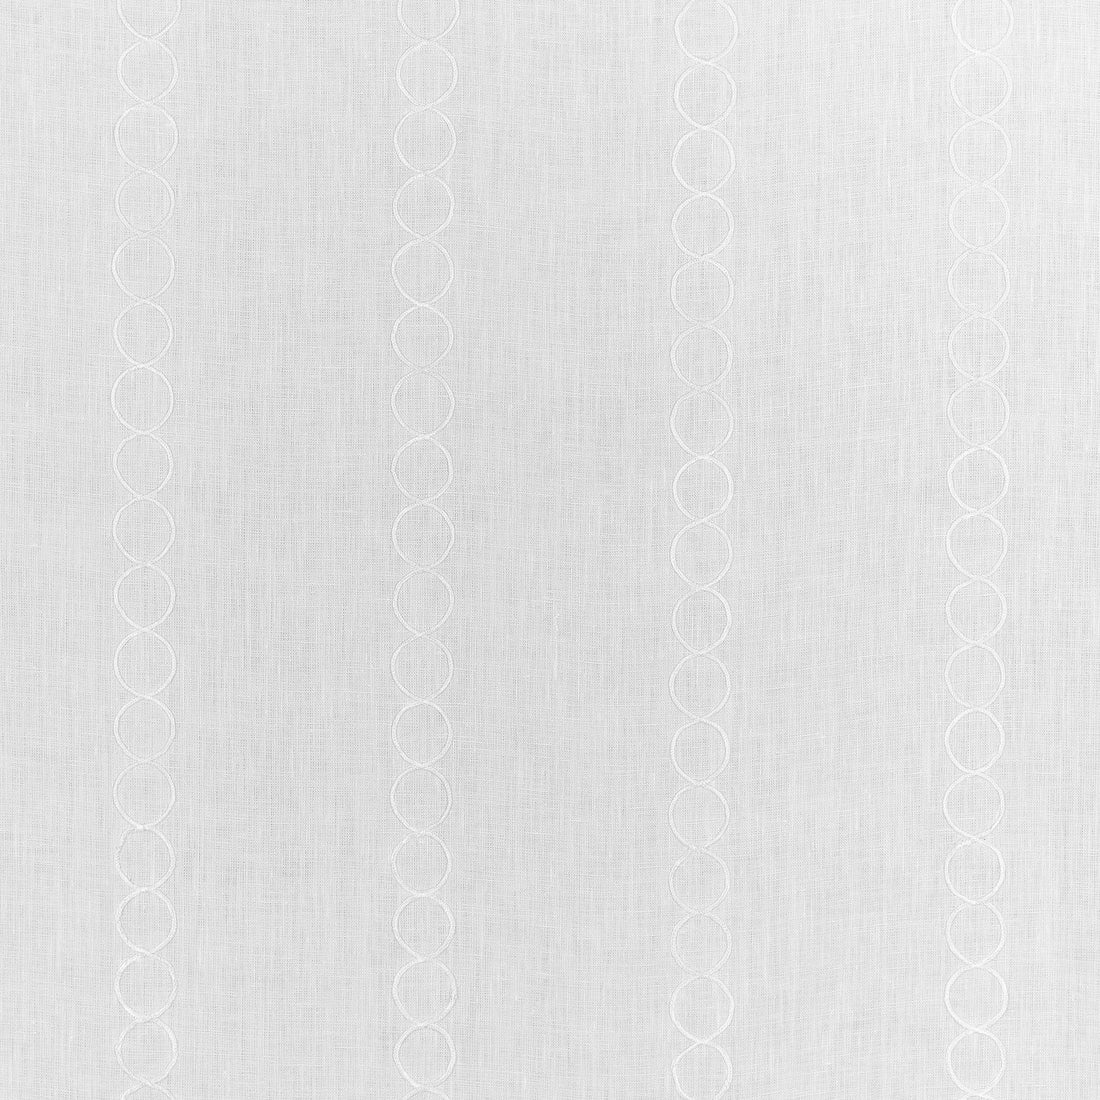 Rings fabric in white color - pattern number AW9117 - by Anna French in the Natural Glimmer collection